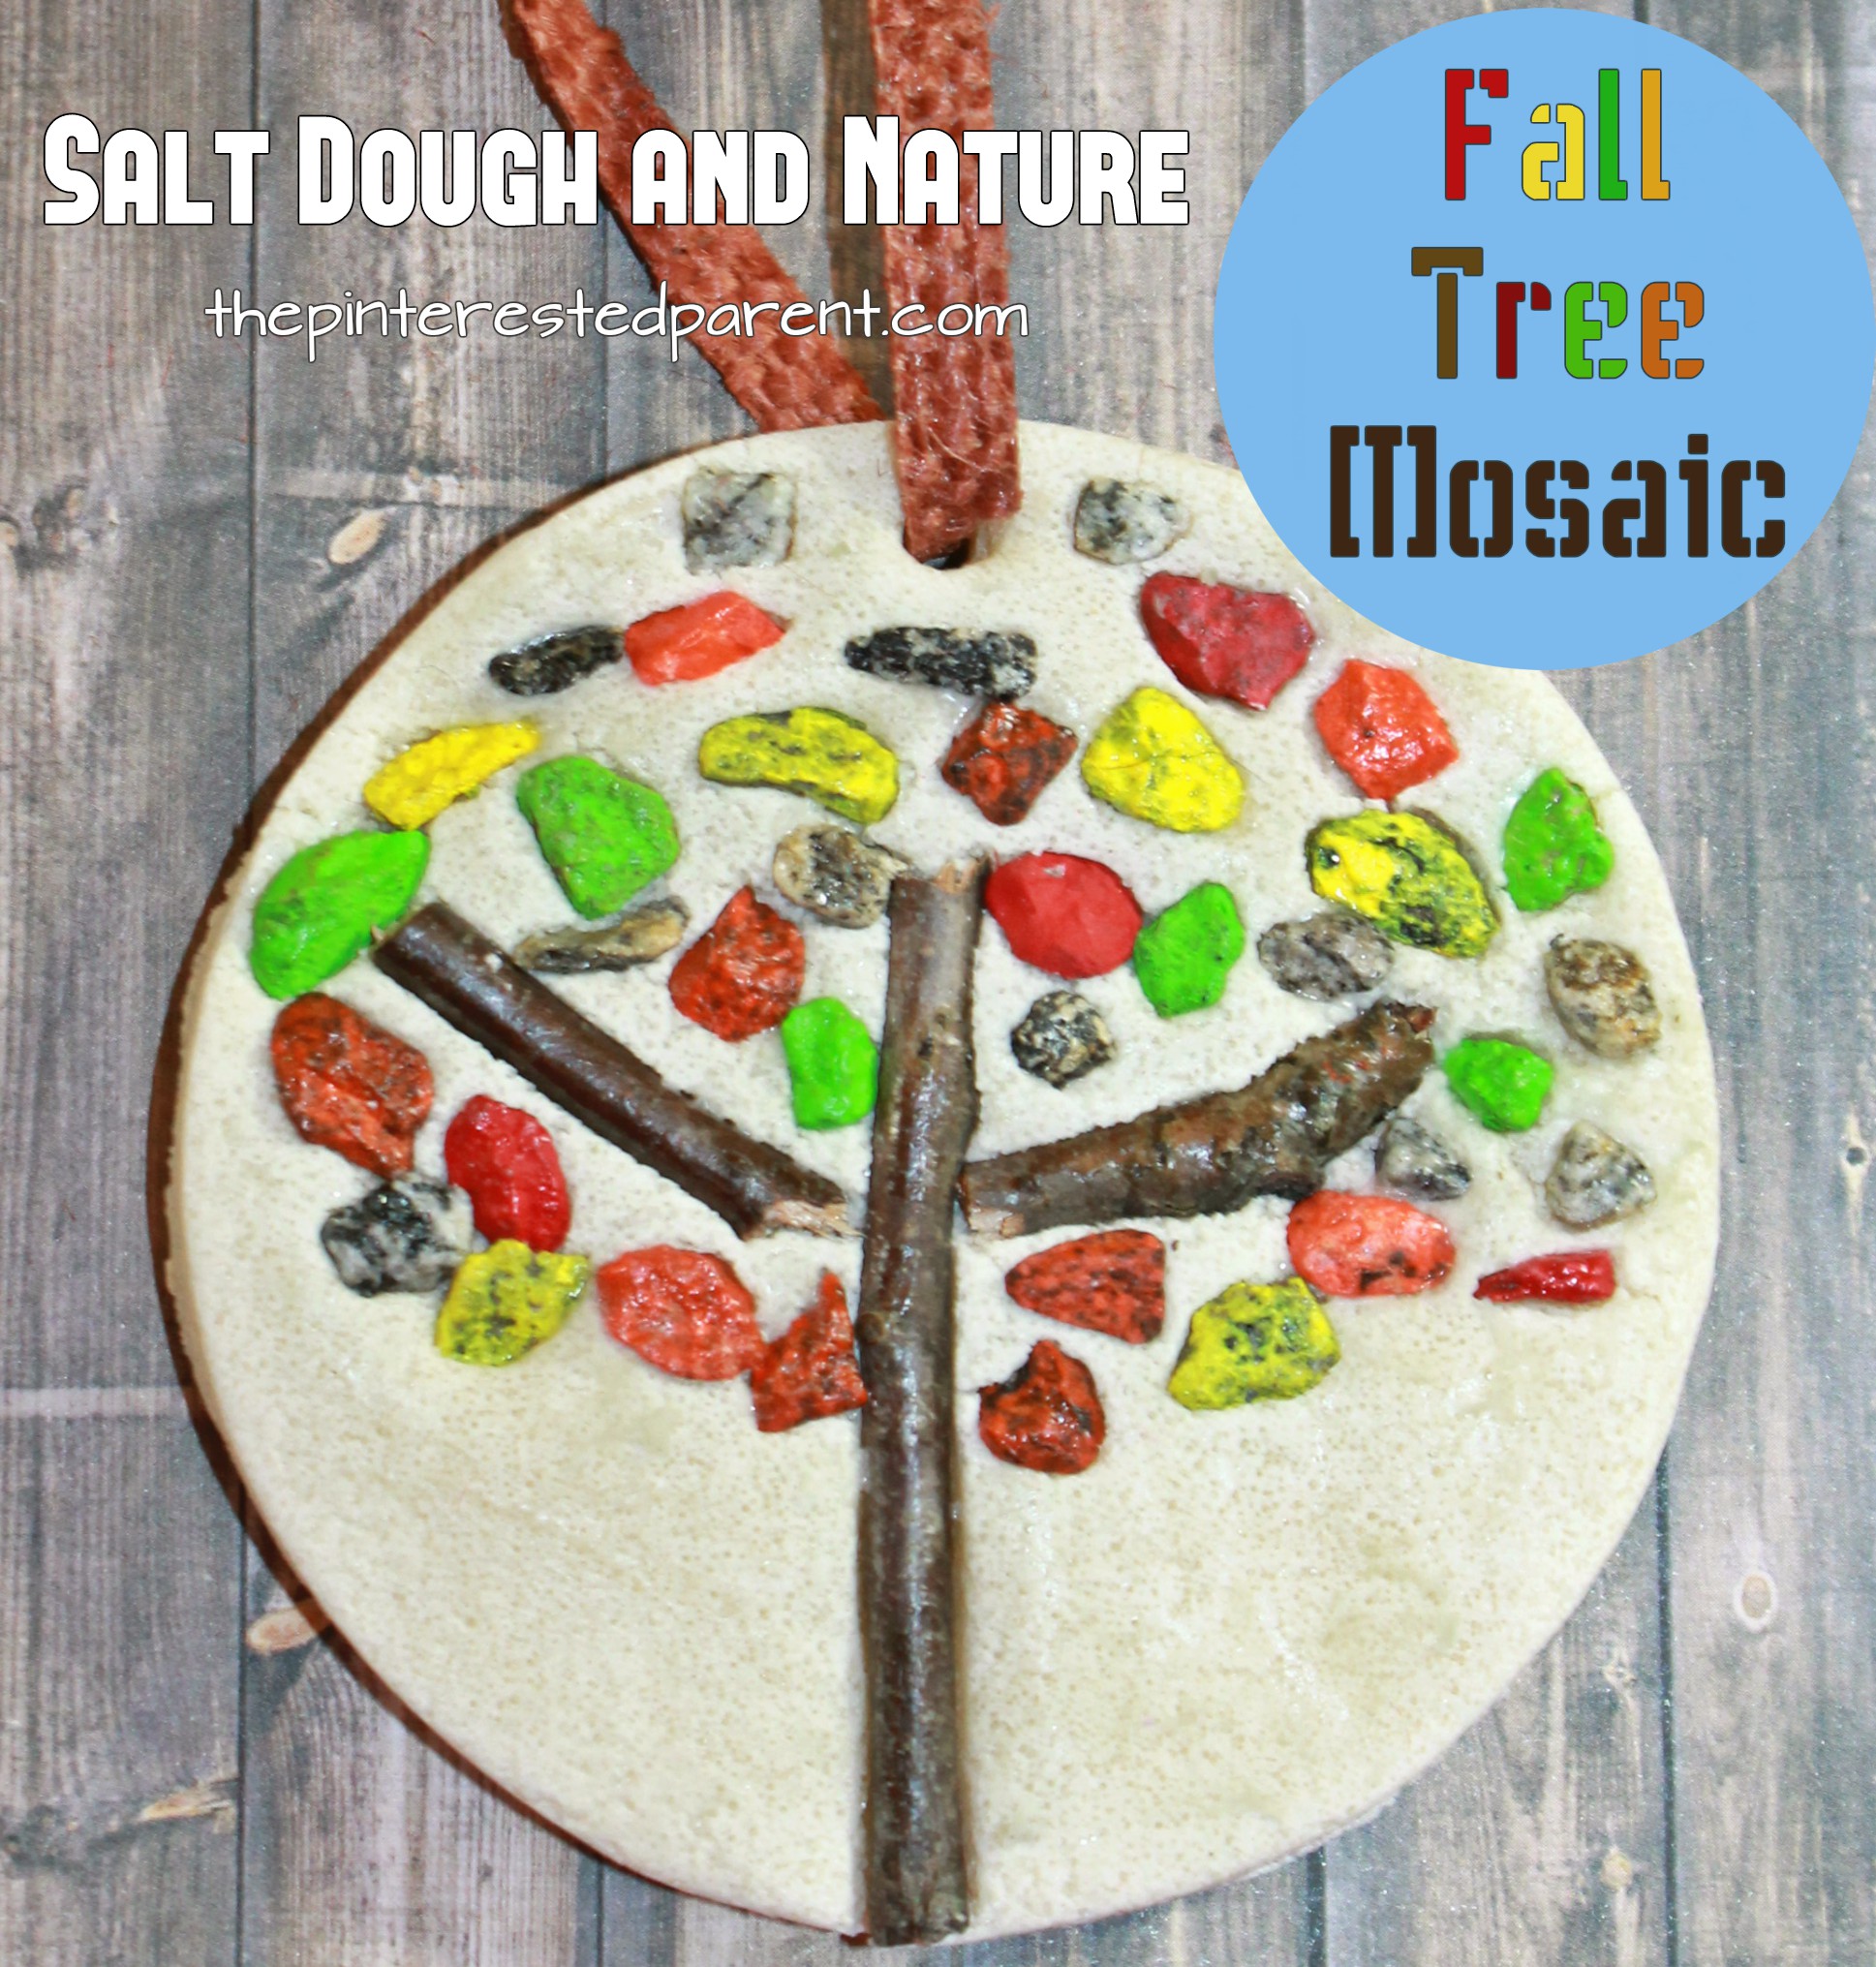 Salt dough and nature fall tree mosaics - autumn arts and crafts for kids. Use pebbles, small rocks and sticks to make these pretty ornaments